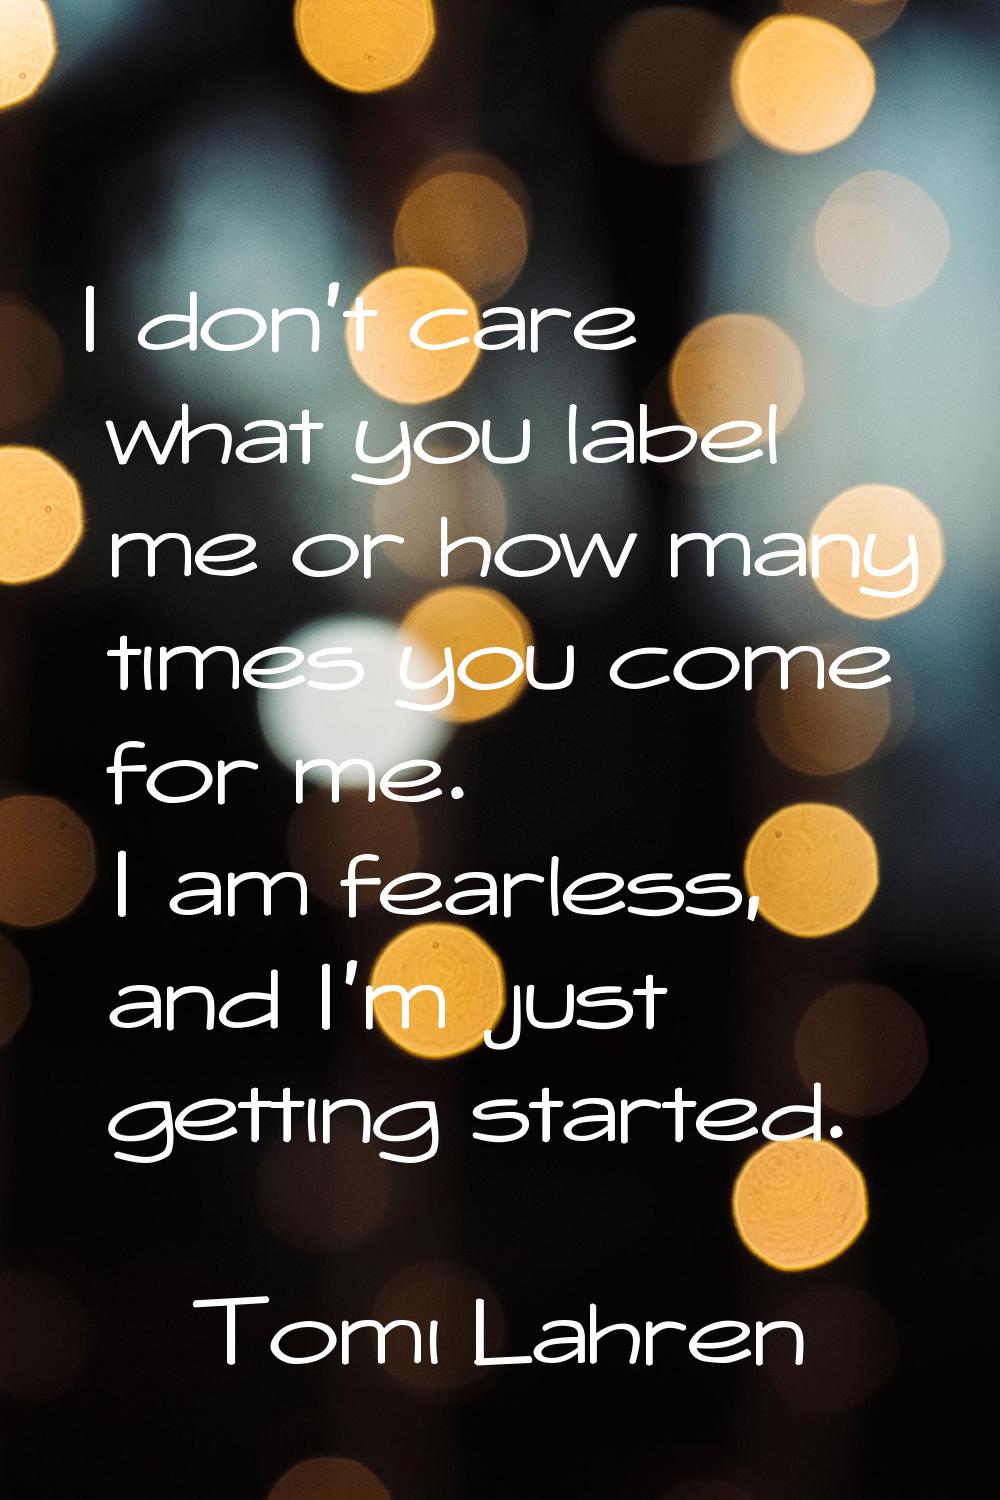 I don't care what you label me or how many times you come for me. I am fearless, and I'm just getti